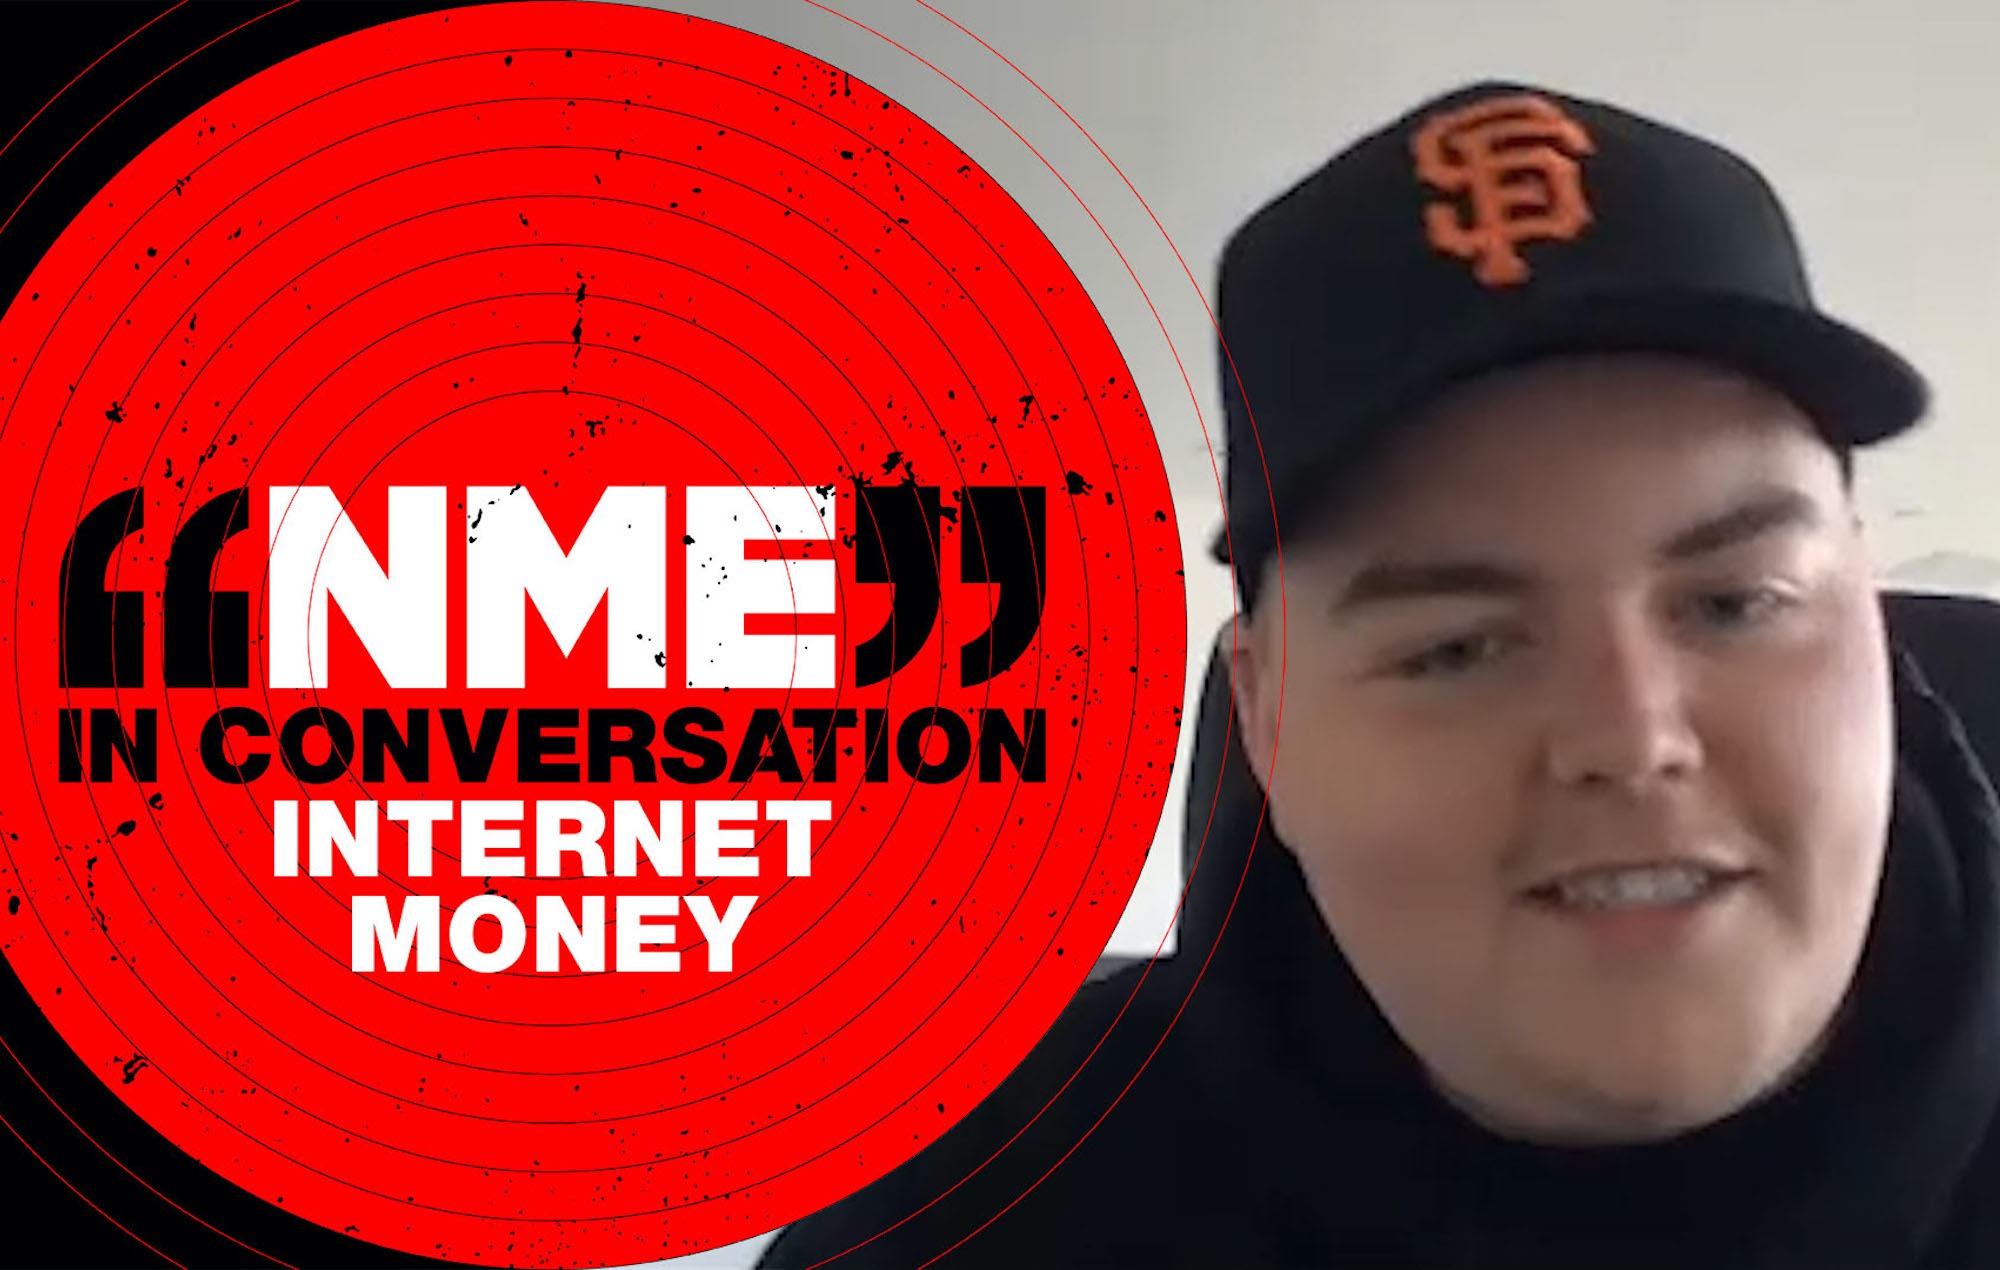 In Conversation with Internet Money: “We’ve accomplished so much in such little time”